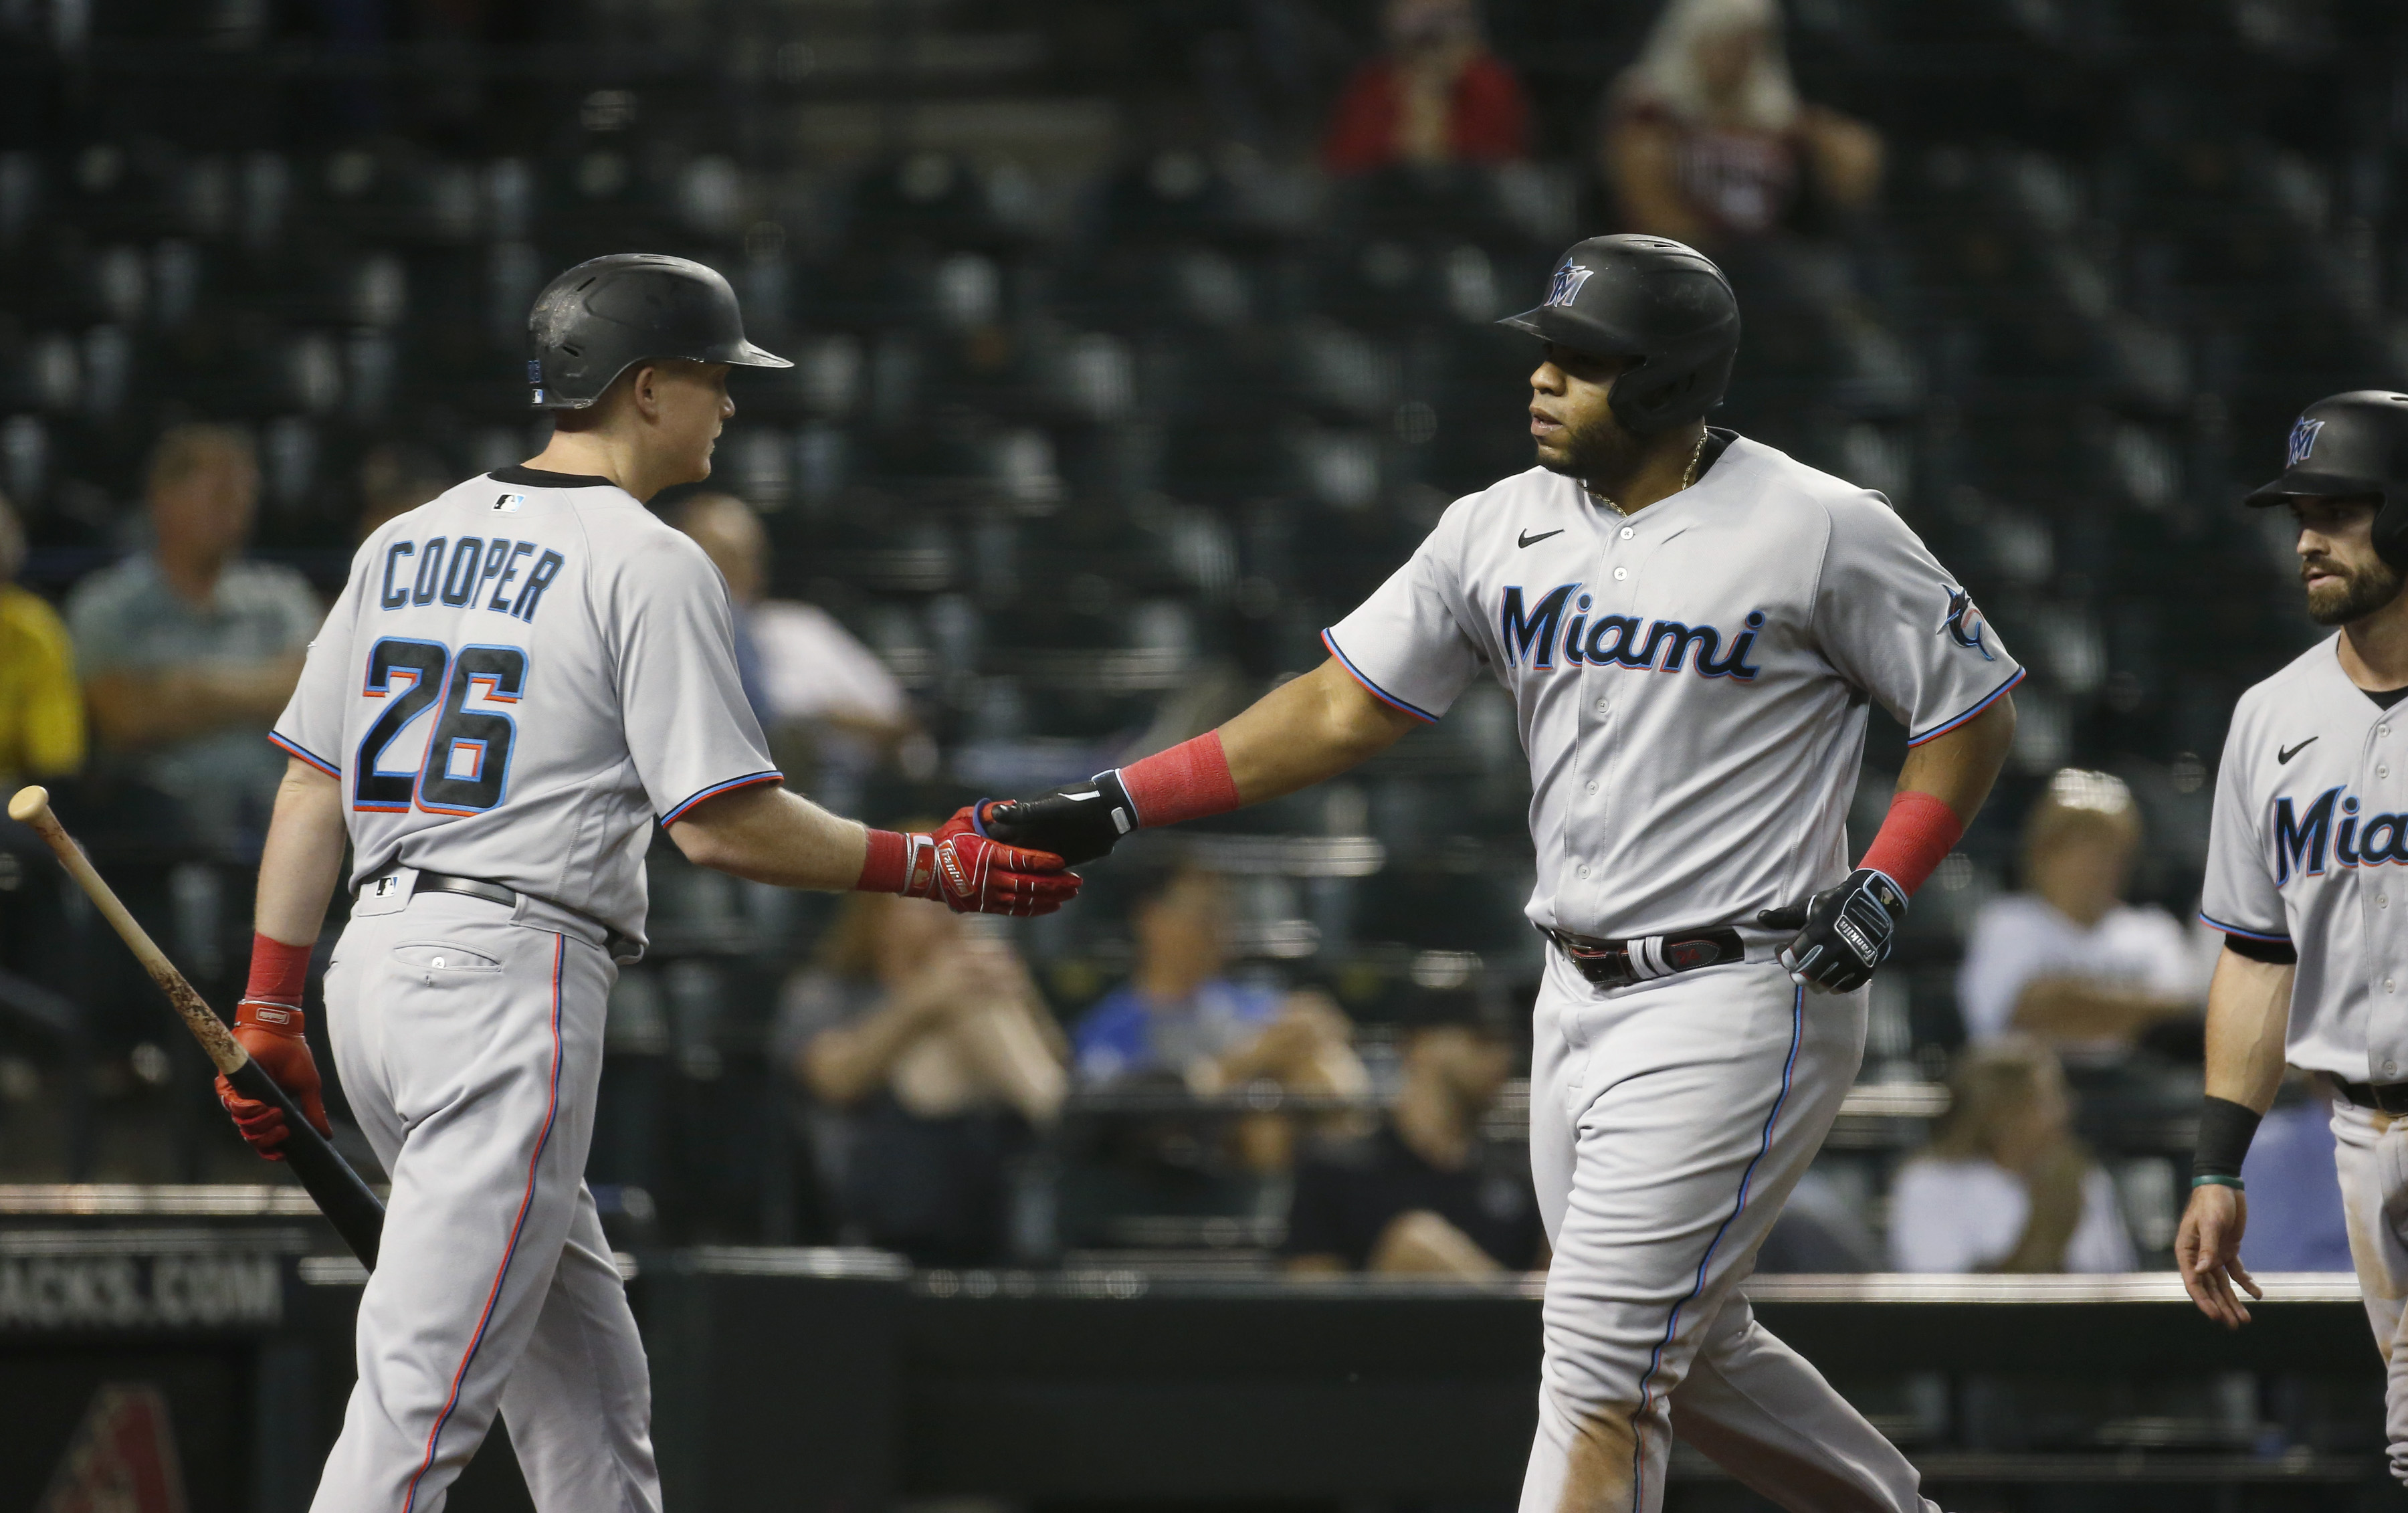 Jesus Aguilar #24 of the Miami Marlins is congratulated by Garrett Cooper #26 of the Marlins after hitting a two-run home run against the Arizona Diamondbacks during the eighth inning of the MLB game at Chase Field